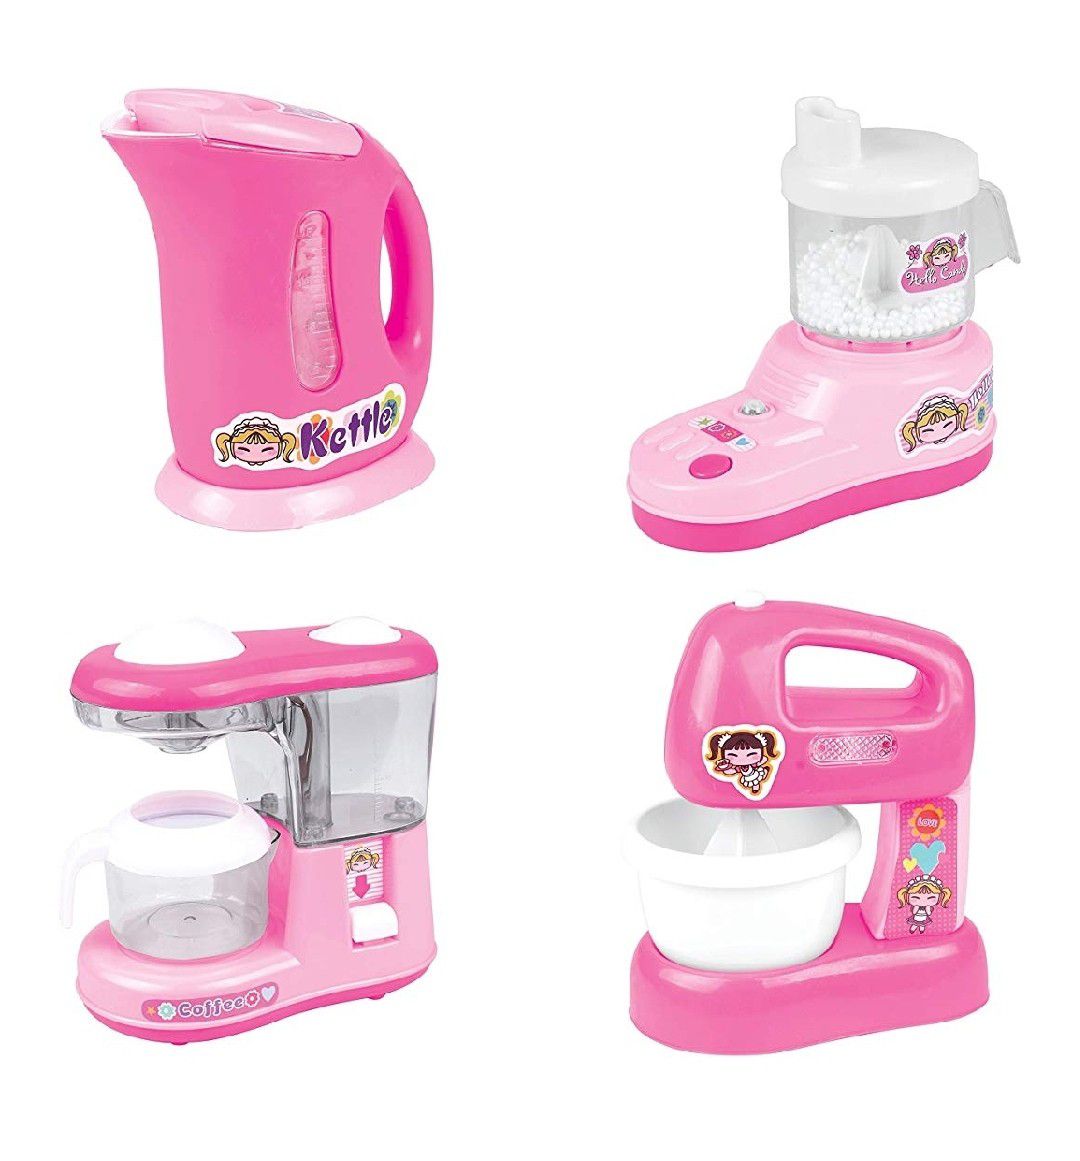 Kitchen Small Appliance Toy Pretend Play Set with Juicer Mixer Kettle and Coffee Maker